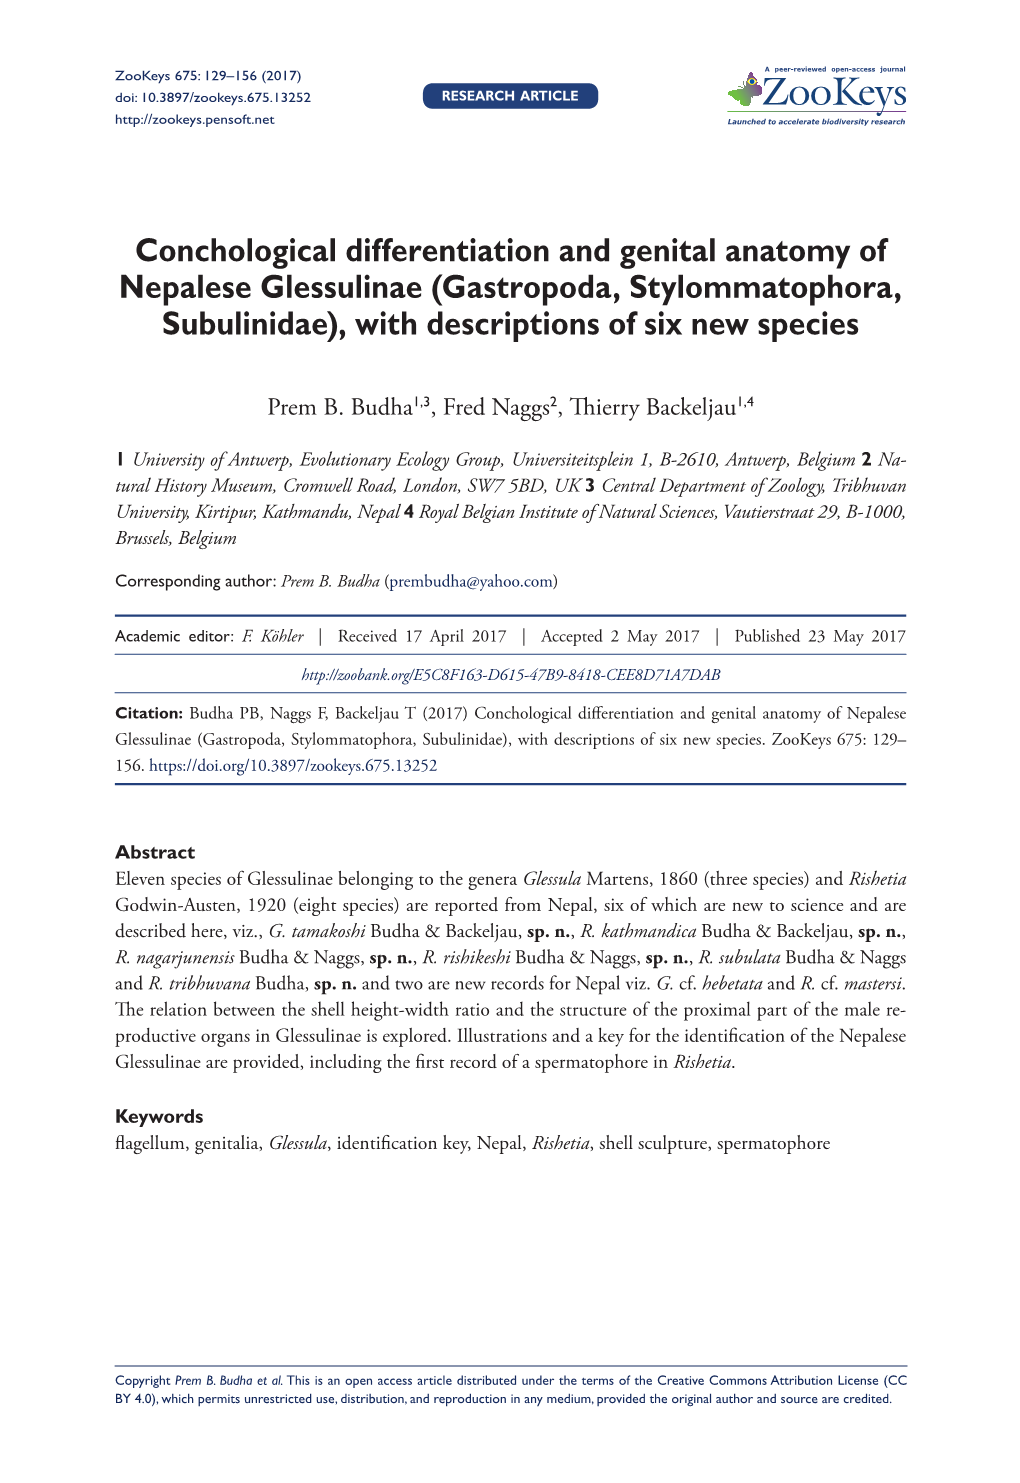 Conchological Differentiation and Genital Anatomy of Nepalese Glessulinae (Gastropoda, Stylommatophora, Subulinidae), with Descriptions of Six New Species